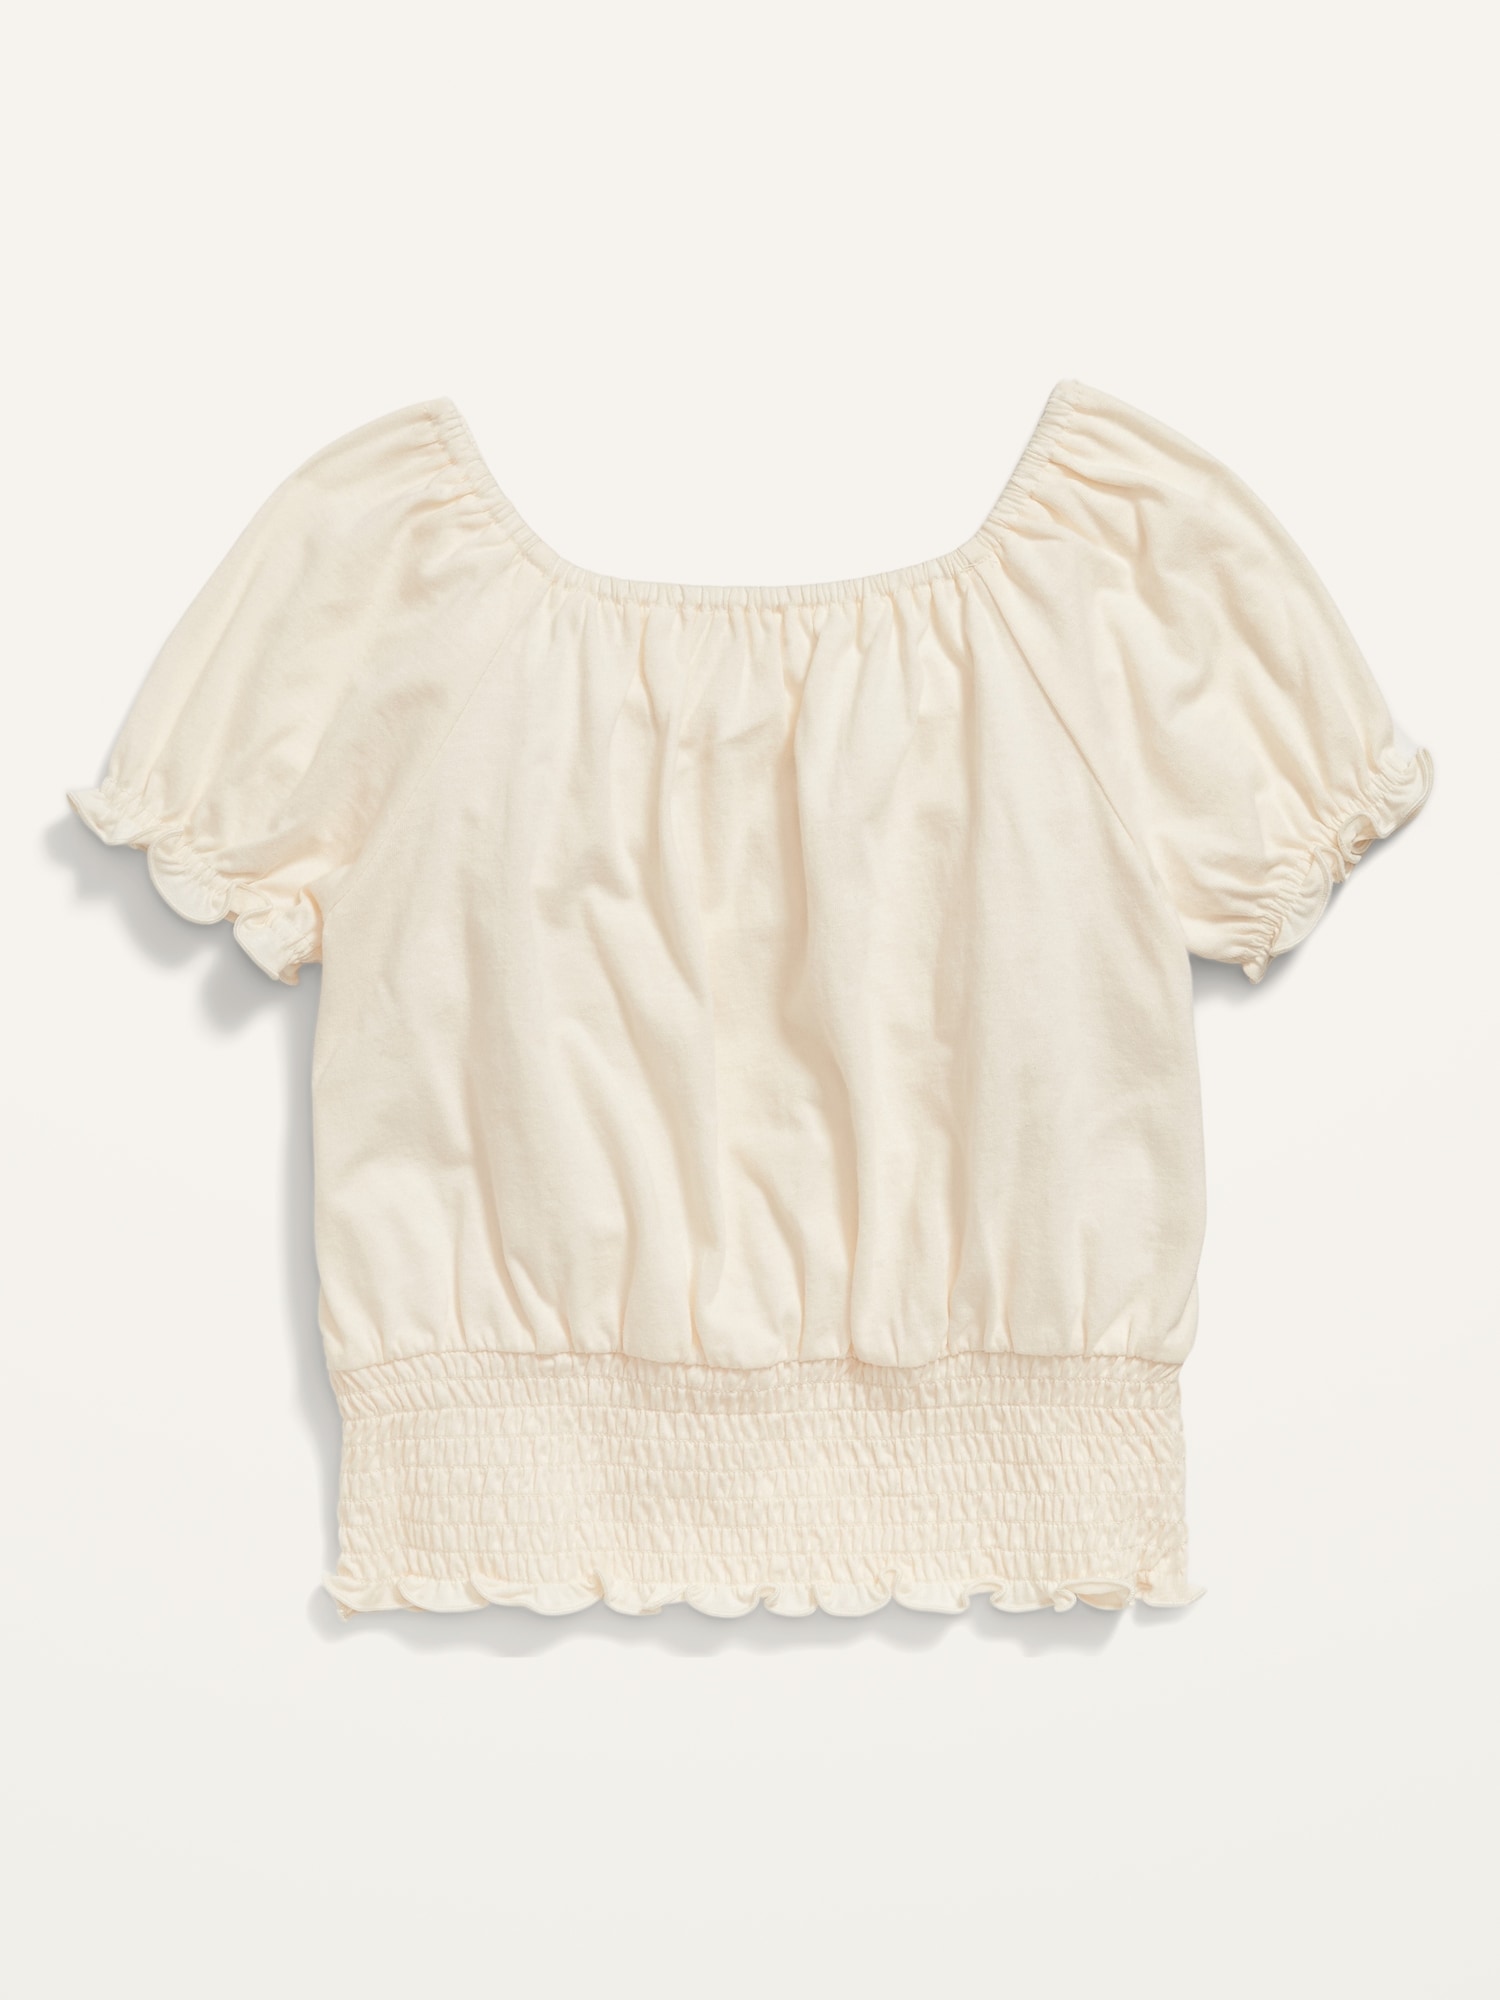 Short Puff-Sleeve Smocked Top for Girls | Old Navy